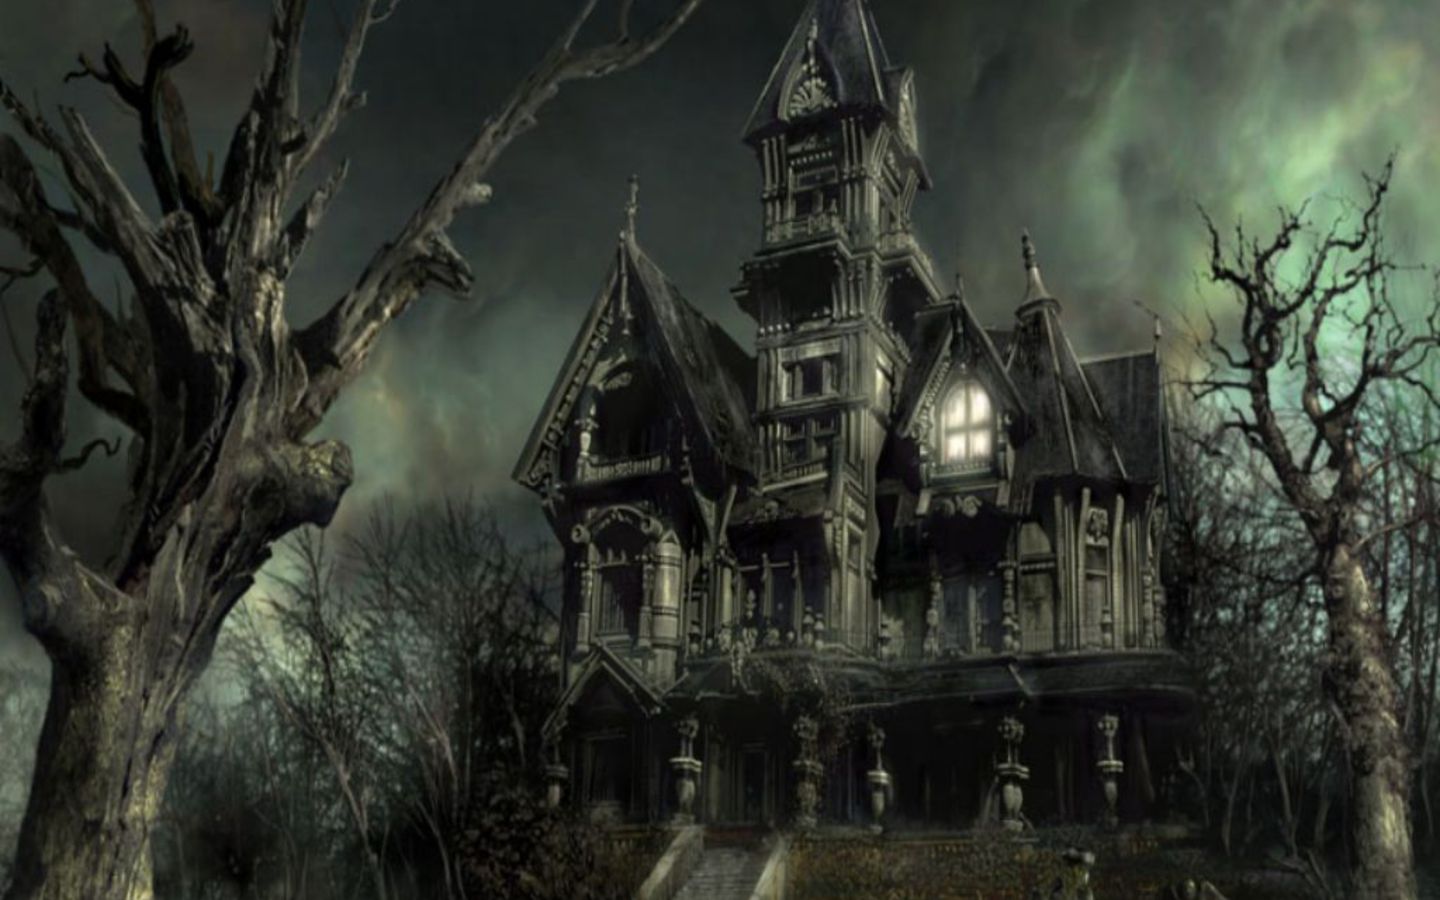 Horror Ghost Houses wallpapers HQ image size : 1440x900